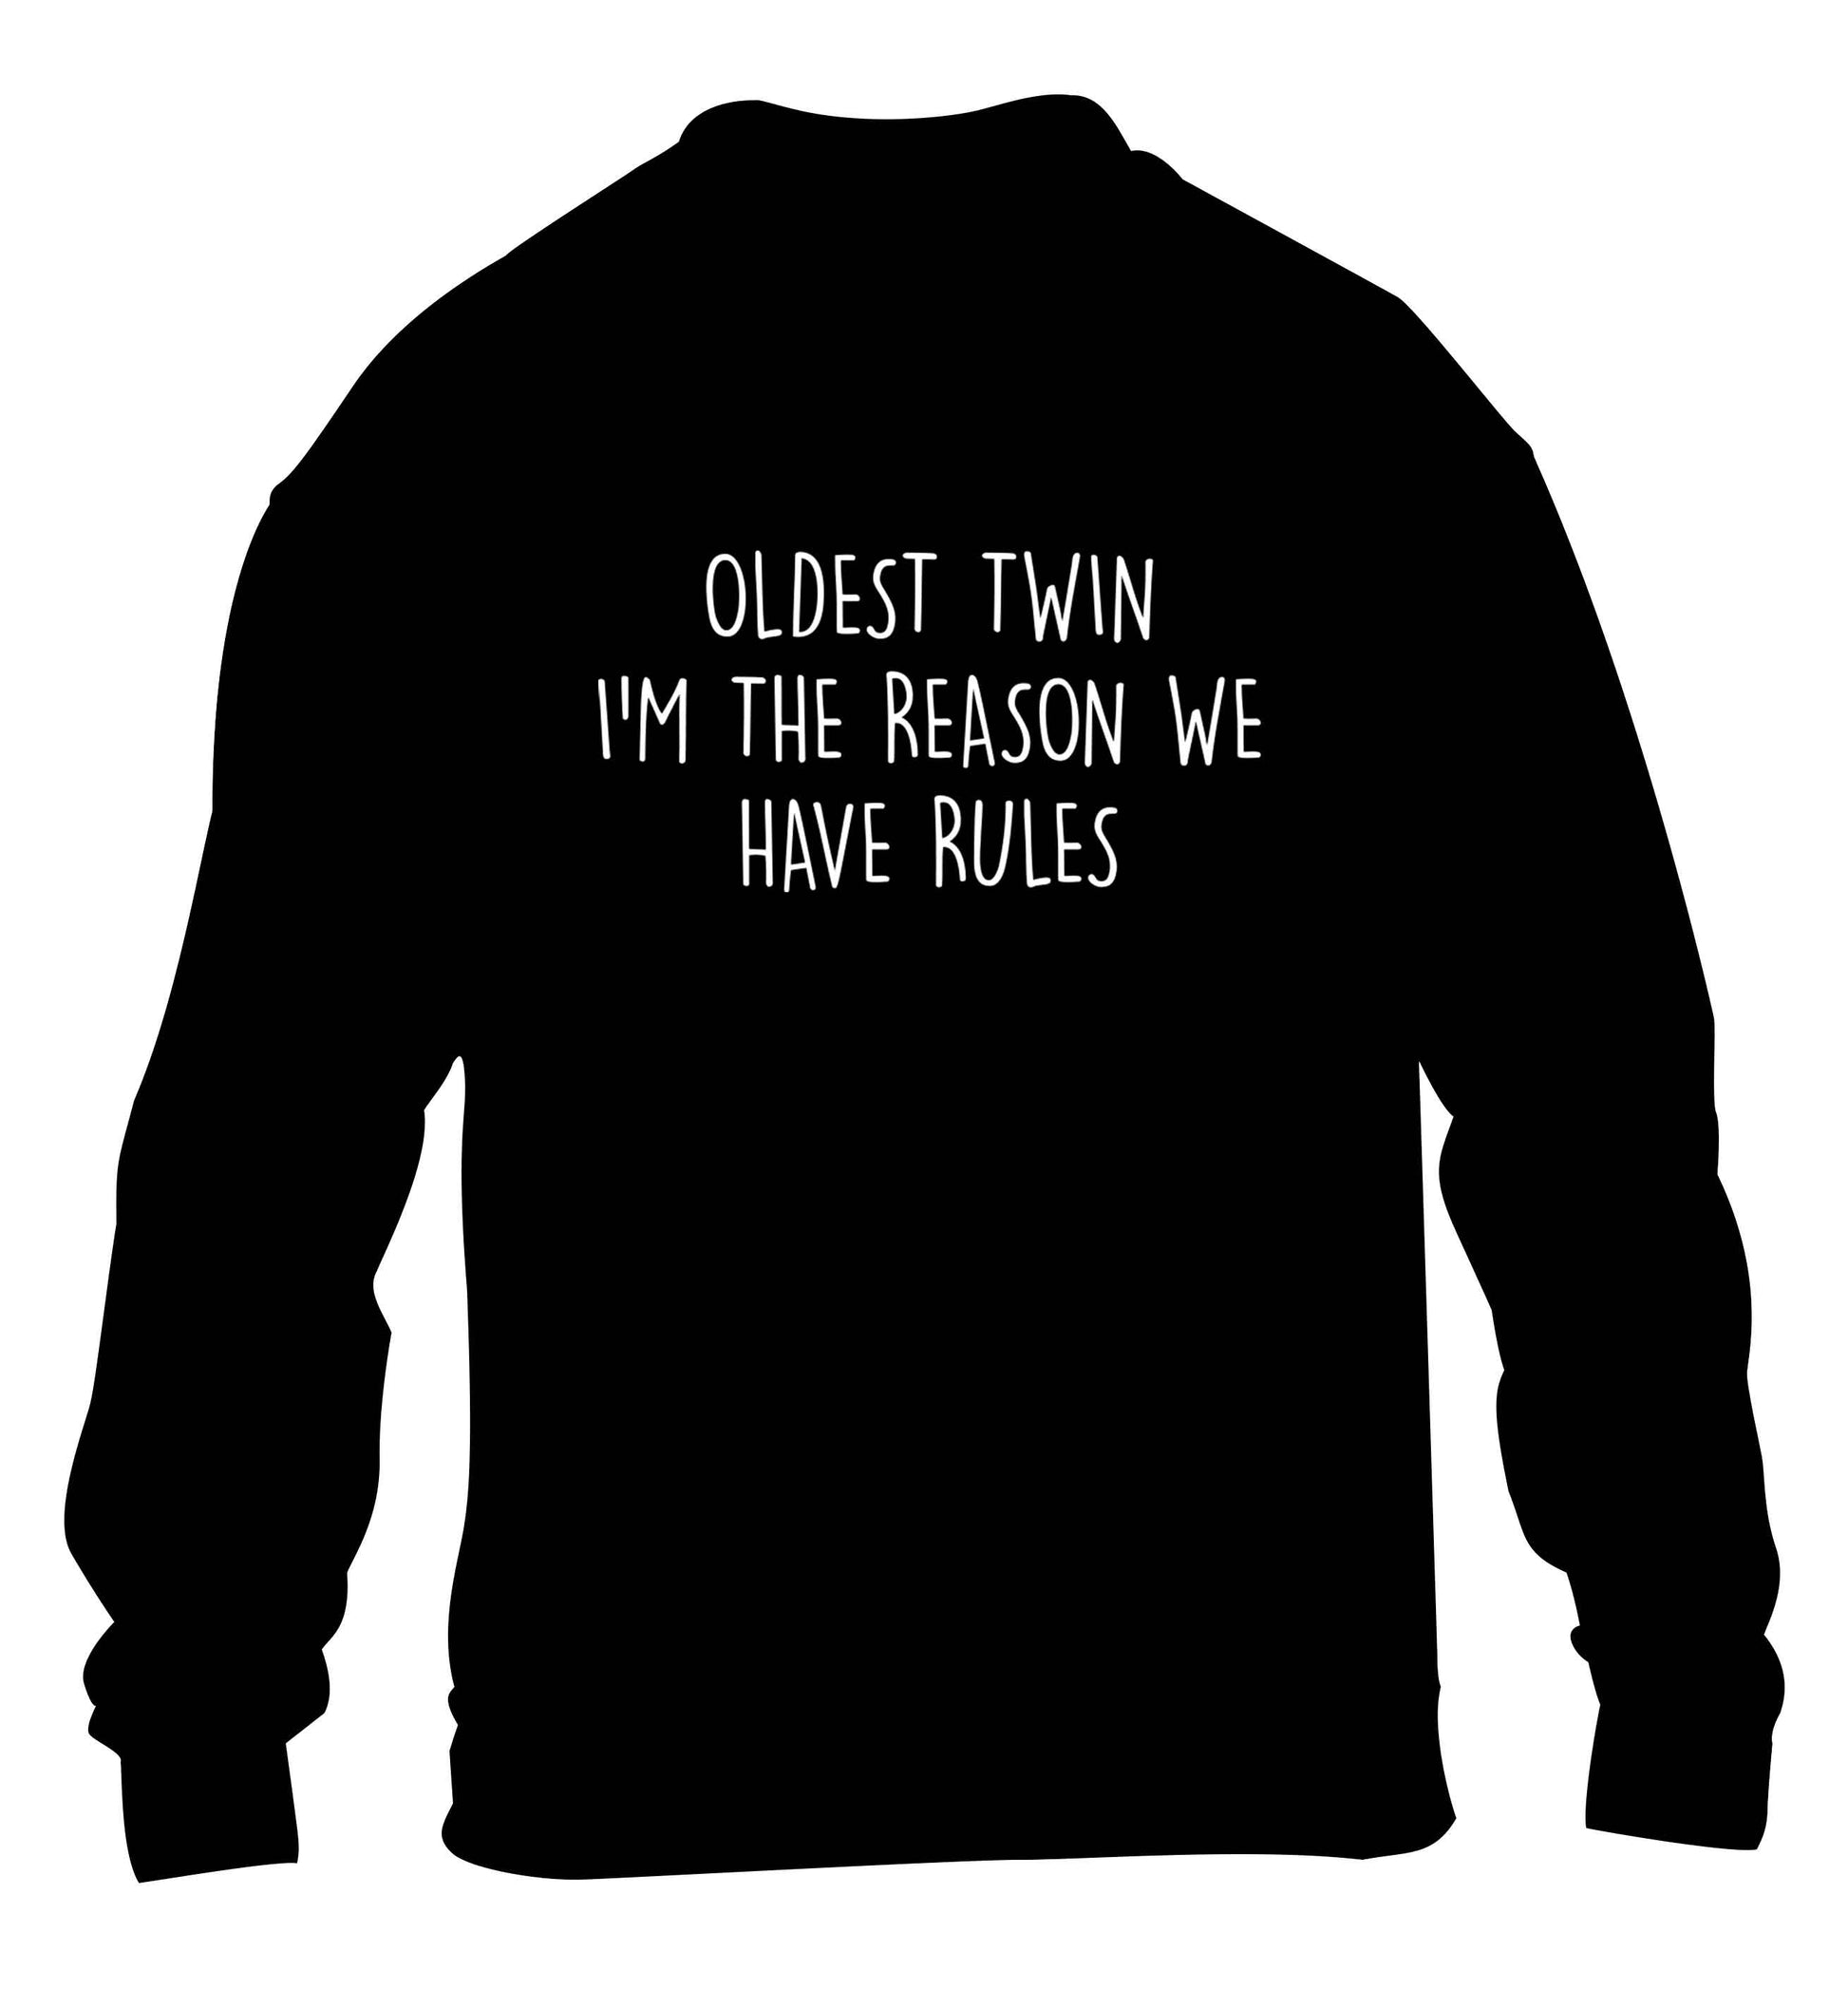 Oldest twin I'm the reason we have rules children's black sweater 12-13 Years